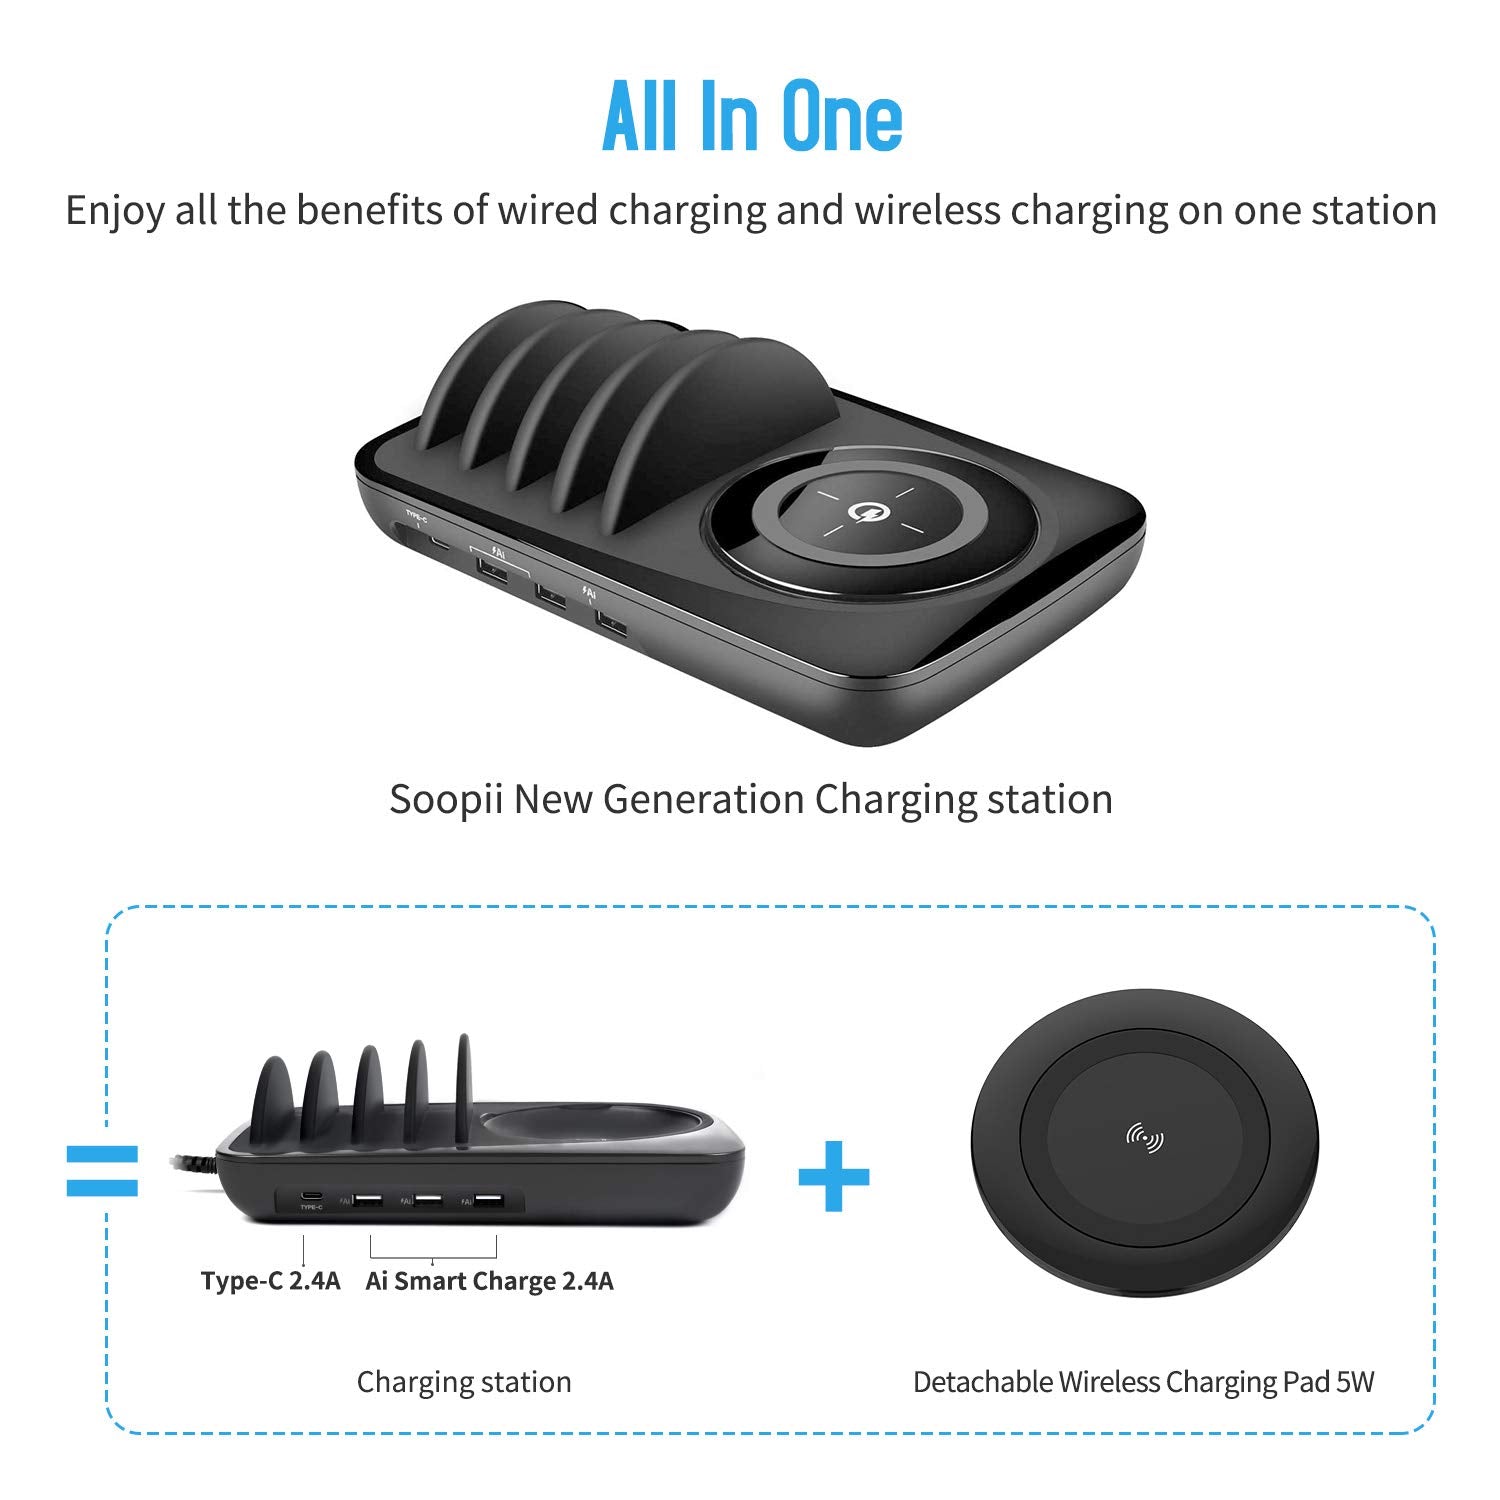 Soopii Wiv6 - 5In1 - 4 Ports Usb and Wireless Charging Station - Black